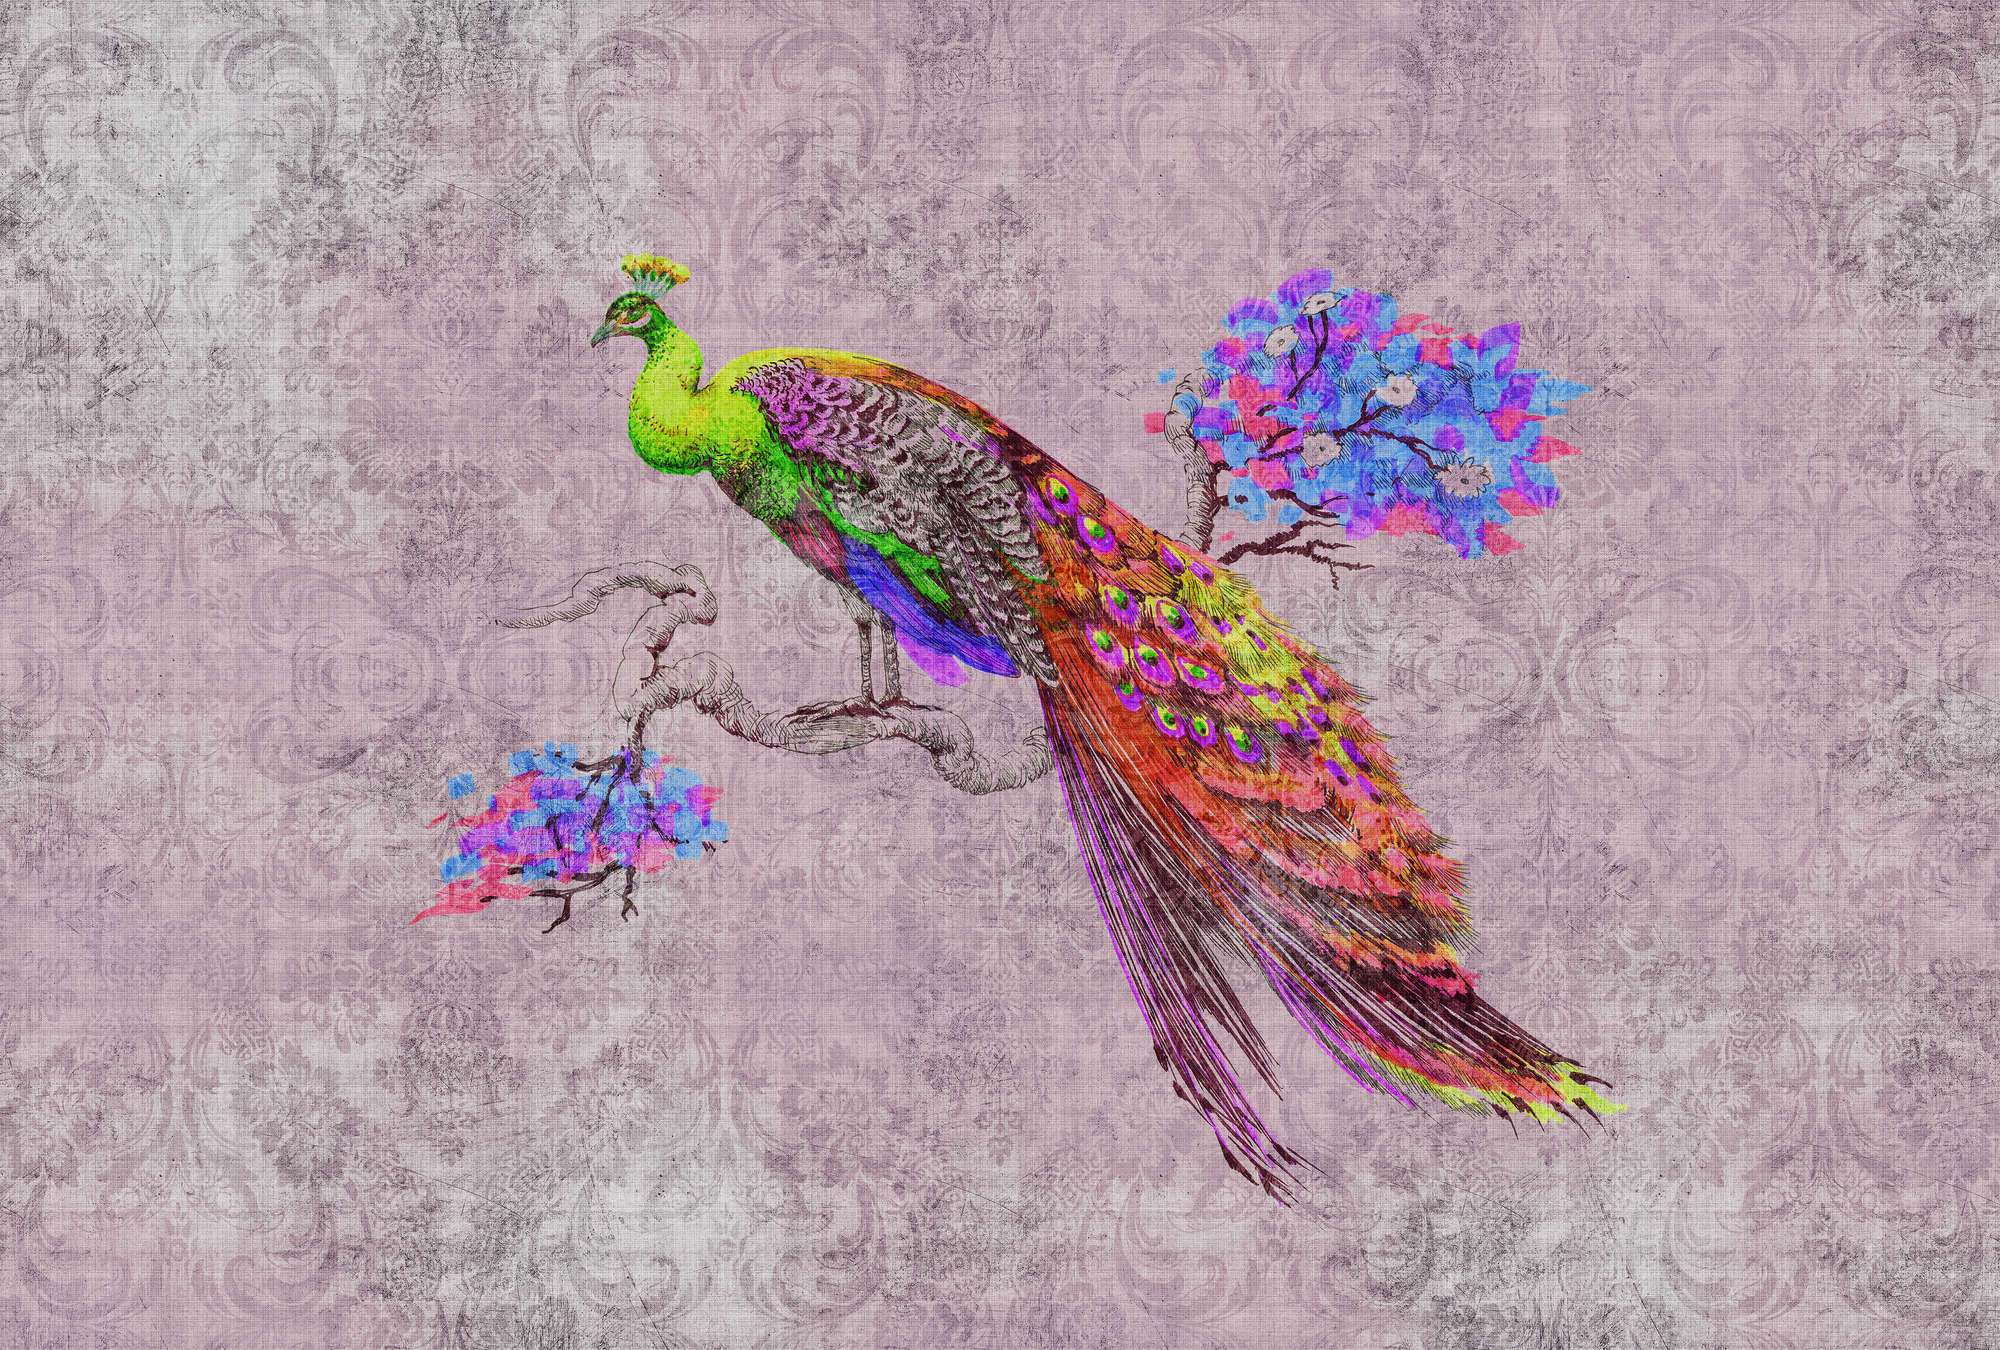             Peacock 2 - Peacock wallpaper with peacock motif & ornament pattern in natural linen structure - green, pink | mother-of-pearl smooth fleece
        